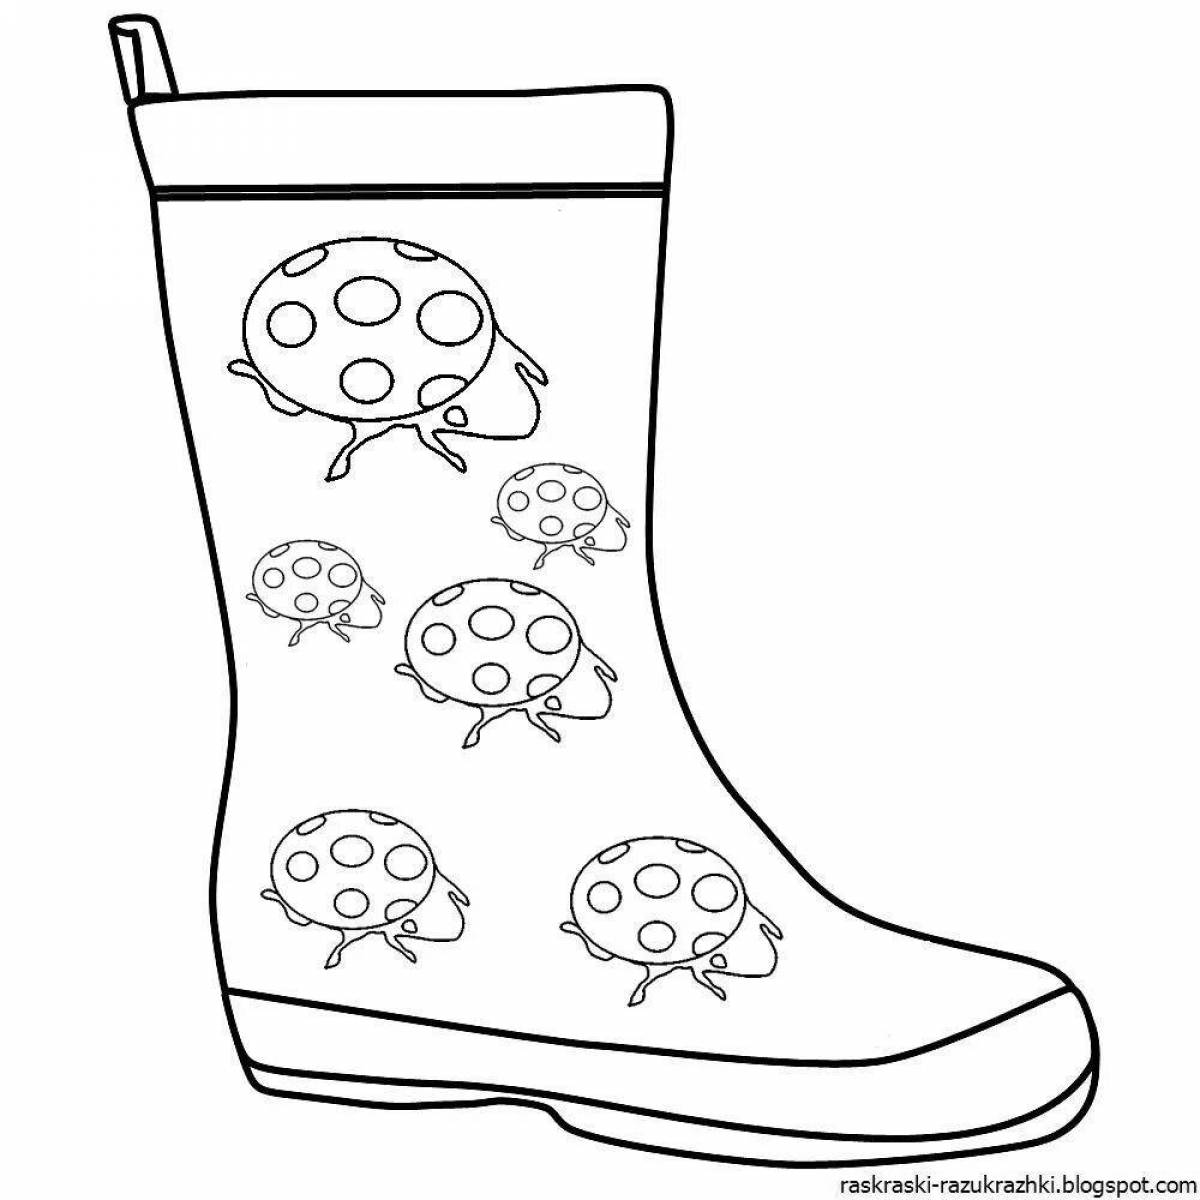 Coloring pages with cute shoes for toddlers 3-4 years old